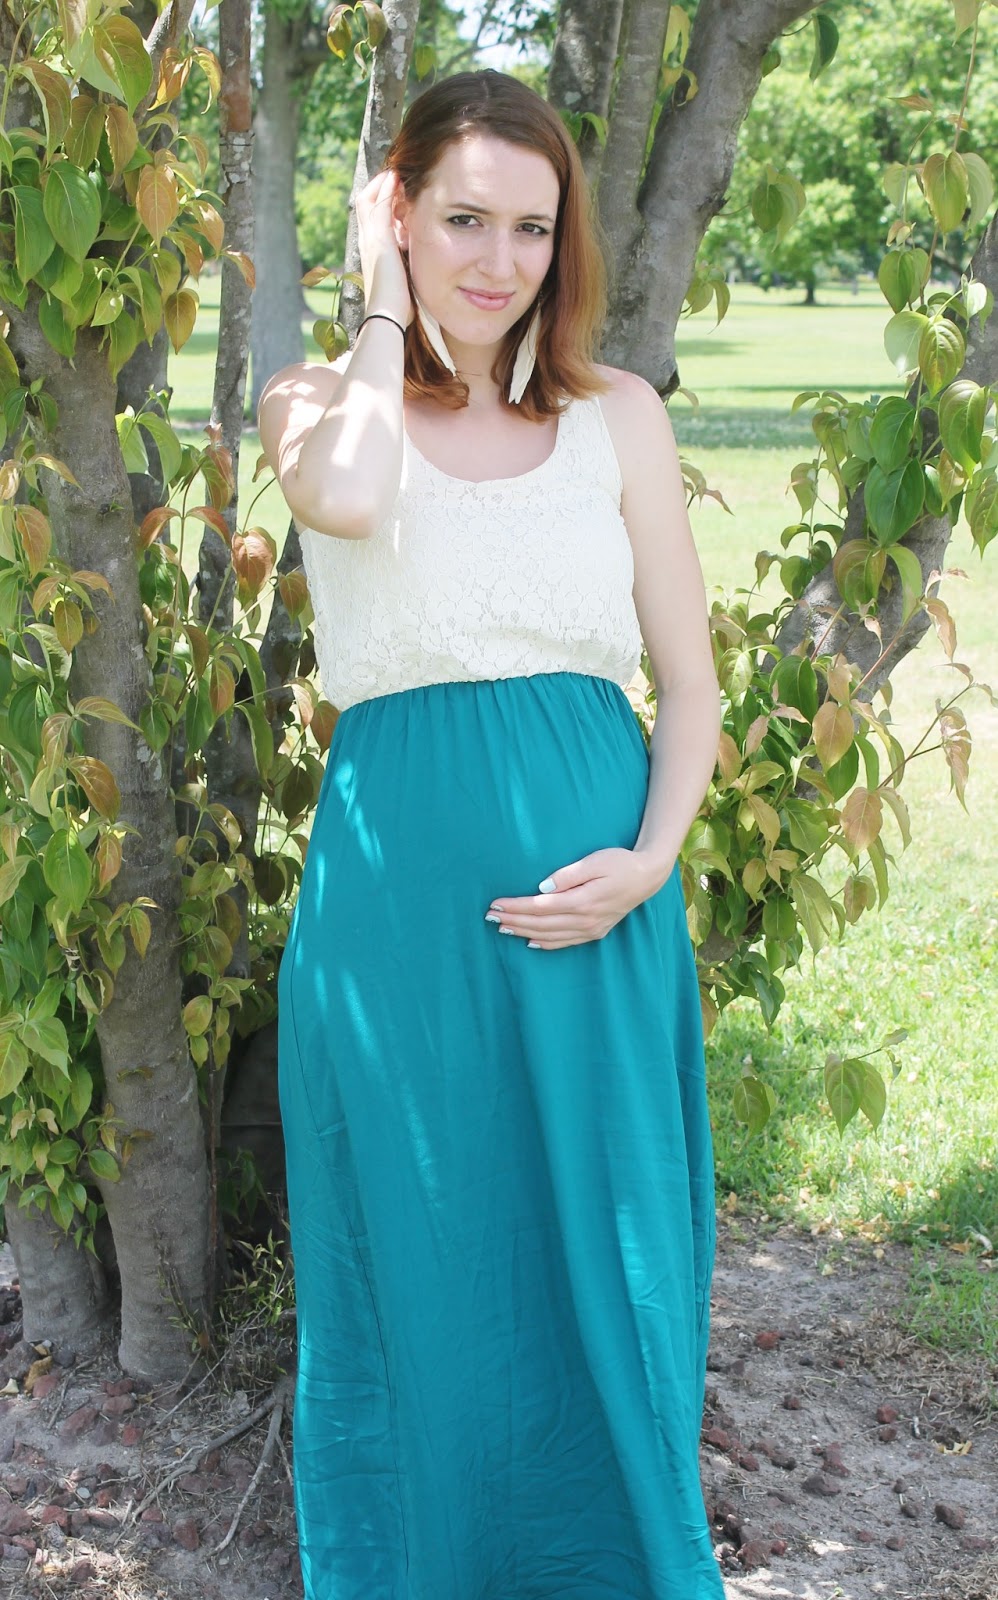 Dealy Os Product Reviews: Pink Blush Maternity Review and Giveaway